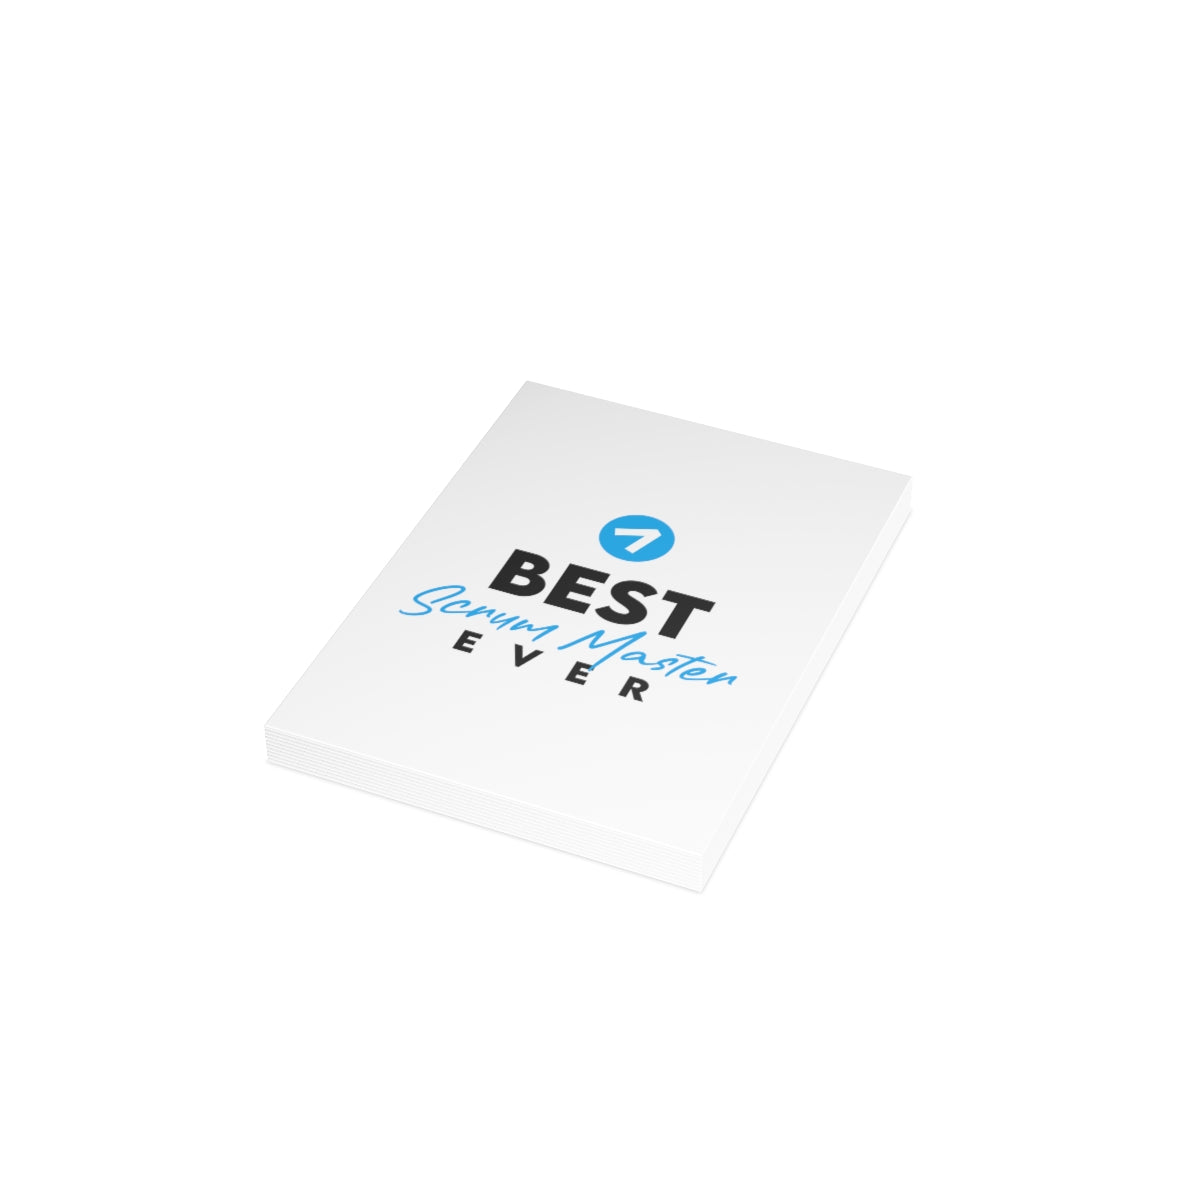 Best Scrum Master ever - Light blue - Folded Greeting Cards (1, 10, 30, and 50pcs)